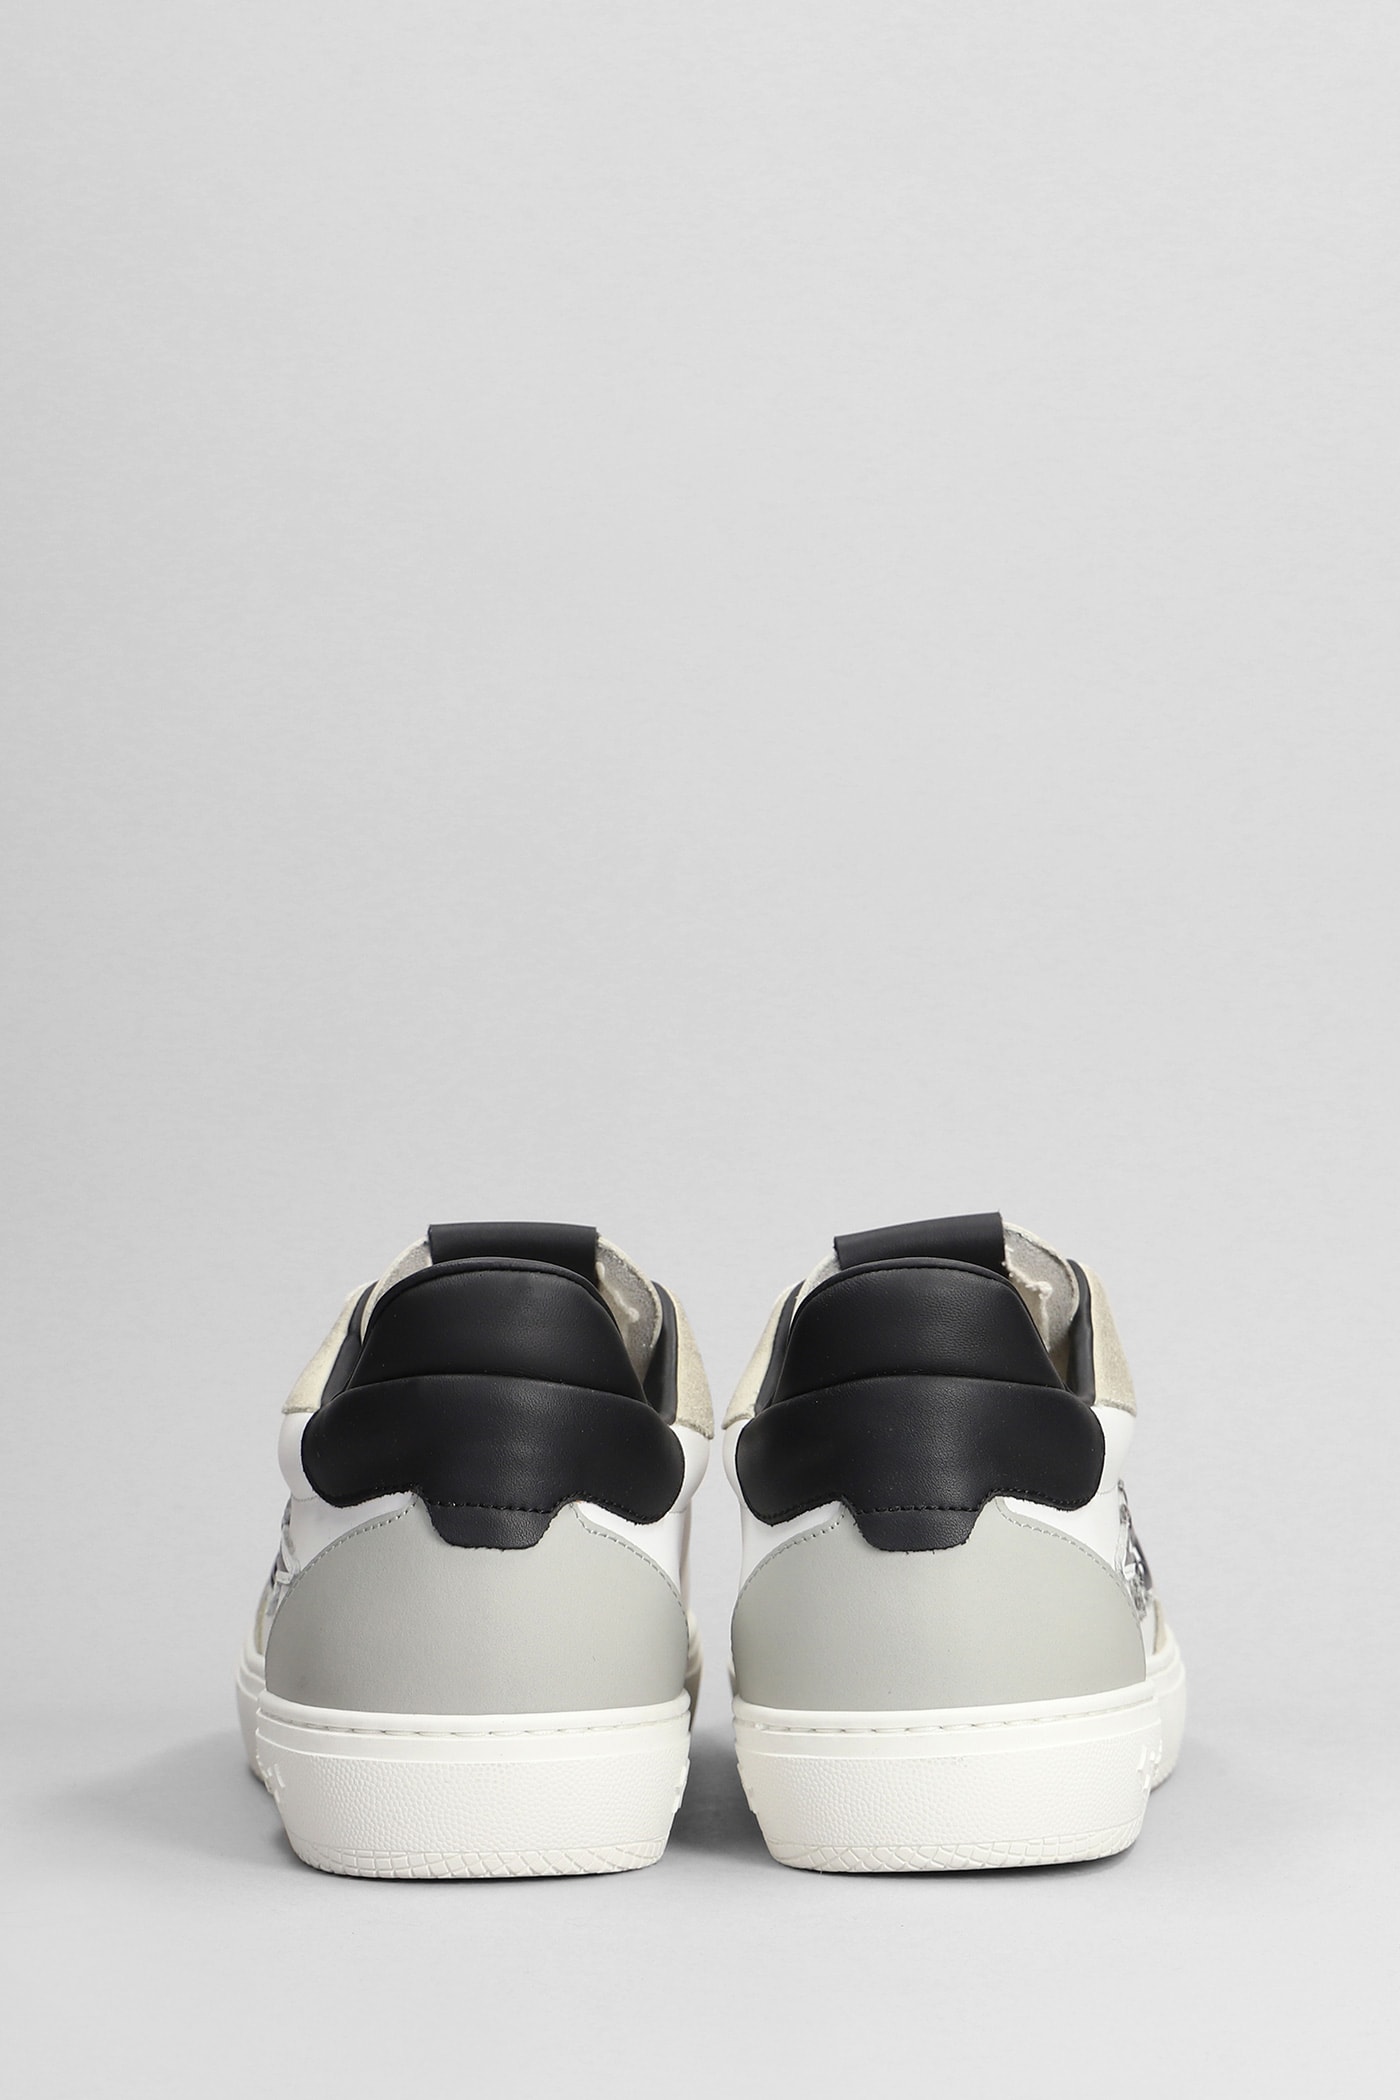 Shop Enterprise Japan Sneakers In White Suede And Leather In White And Black